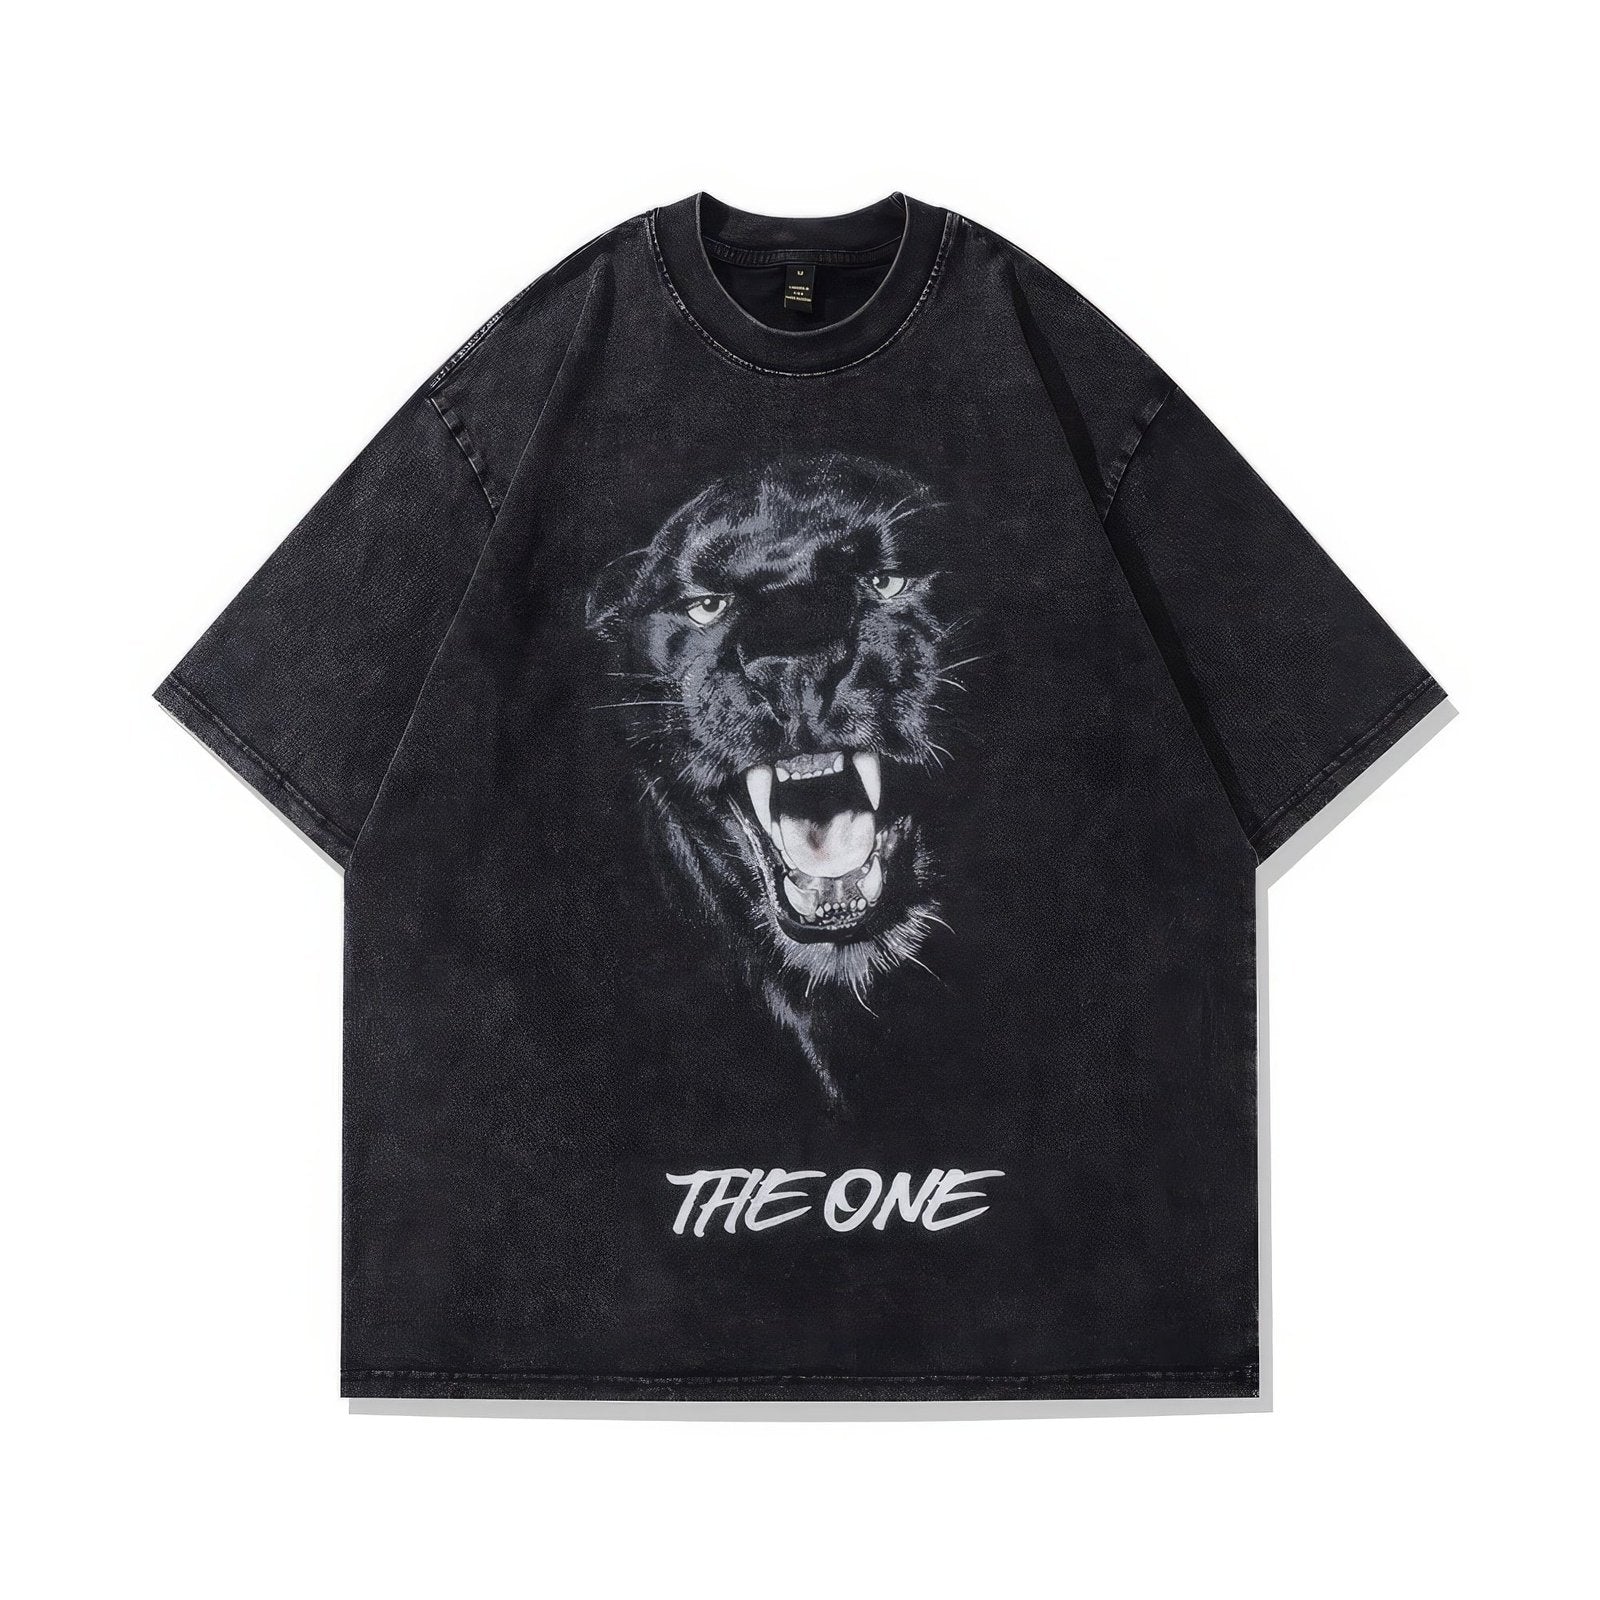 The Black Panther Oversized Washed T-Shirt - Starphase